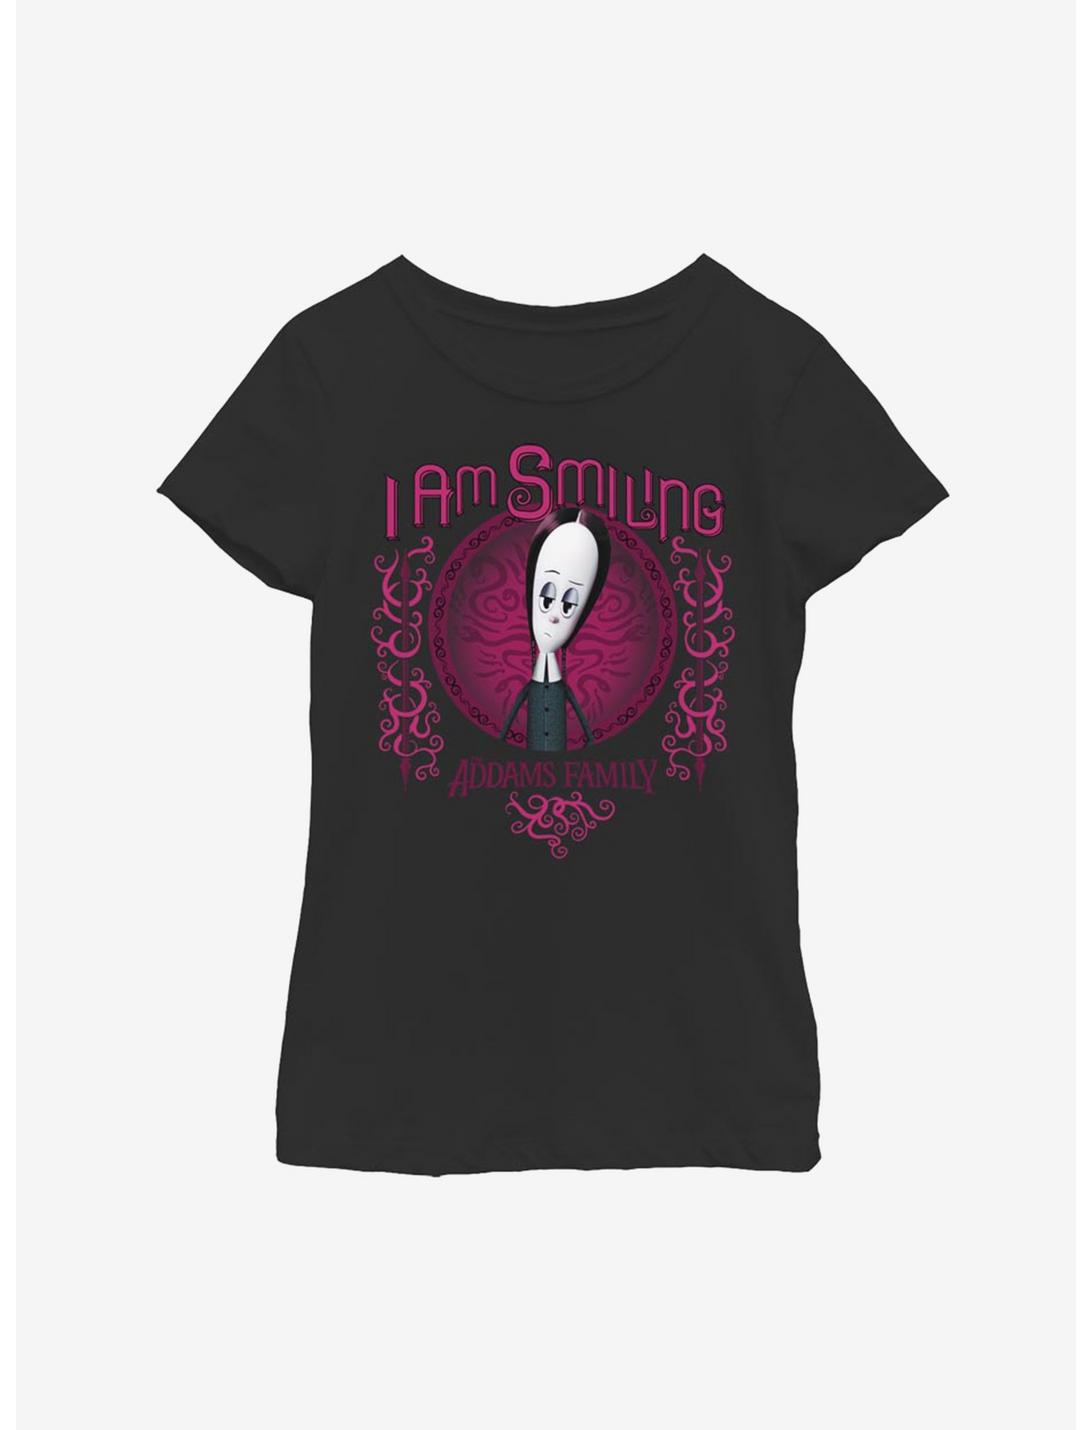 The Addams Family I Am Smiling Youth Girls T-Shirt, BLACK, hi-res